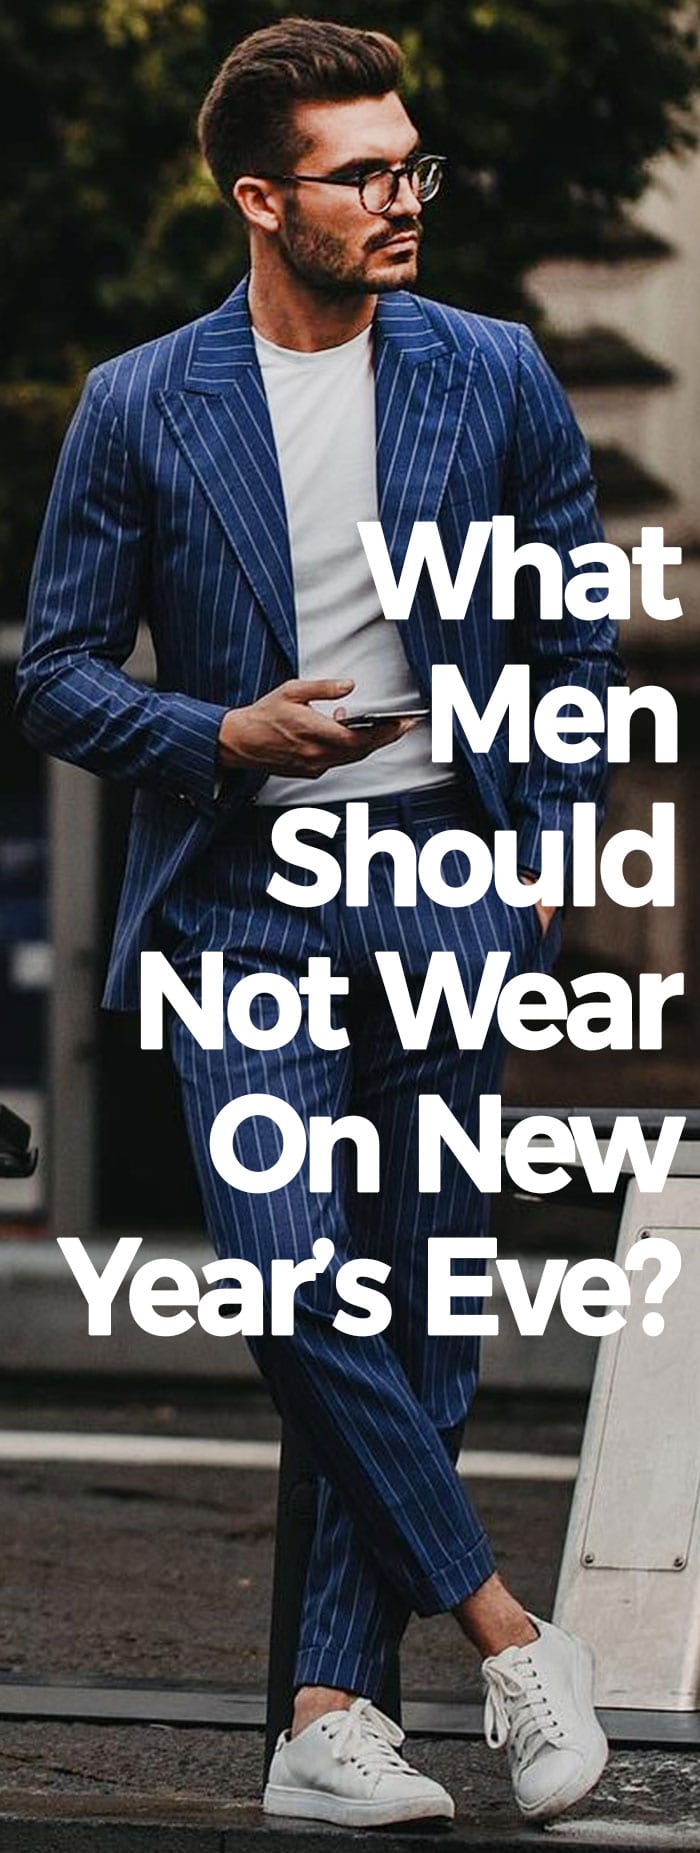 What Men Should Not Wear On New Year's Eve.